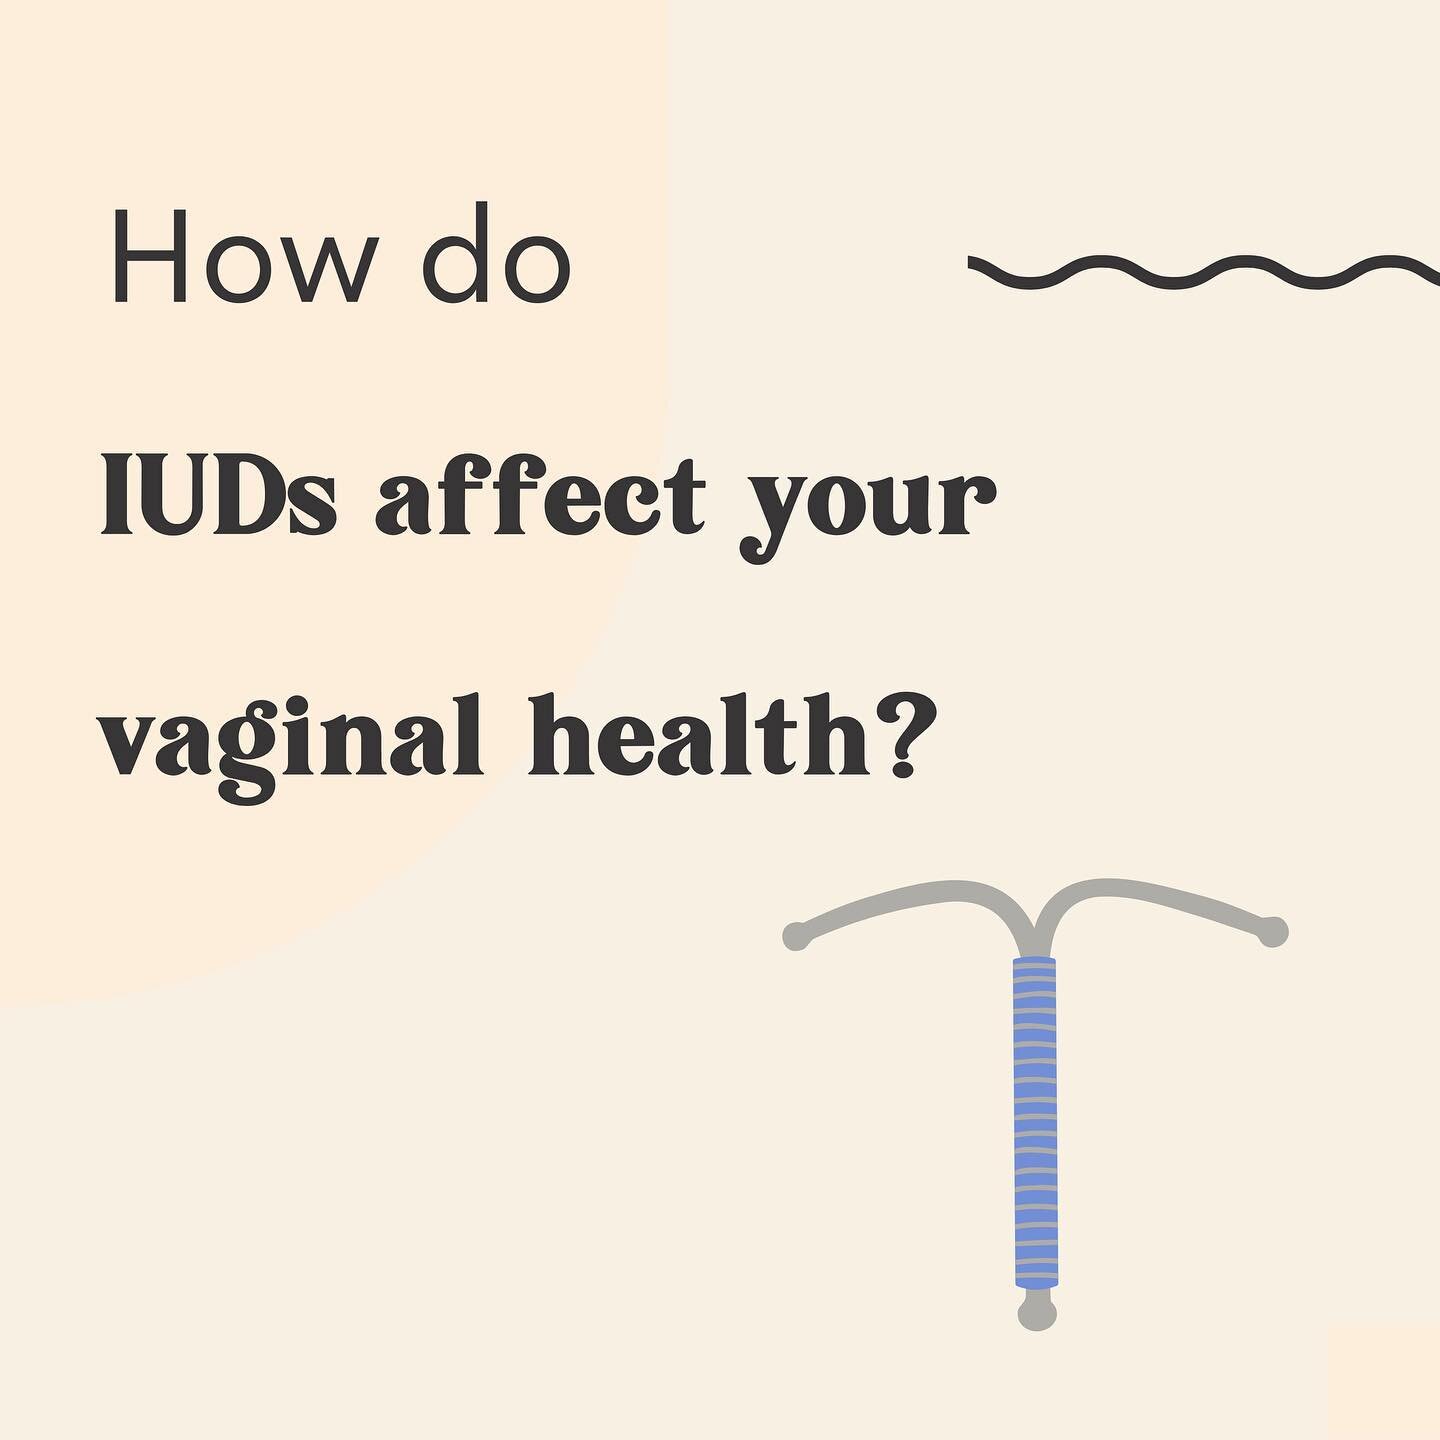 Can IUDs cause BV? The research is showing that yes particularly copper IUDs are linked to alterations in the vaginal microbiome that can lead to BV and biofilm formation. 🦠